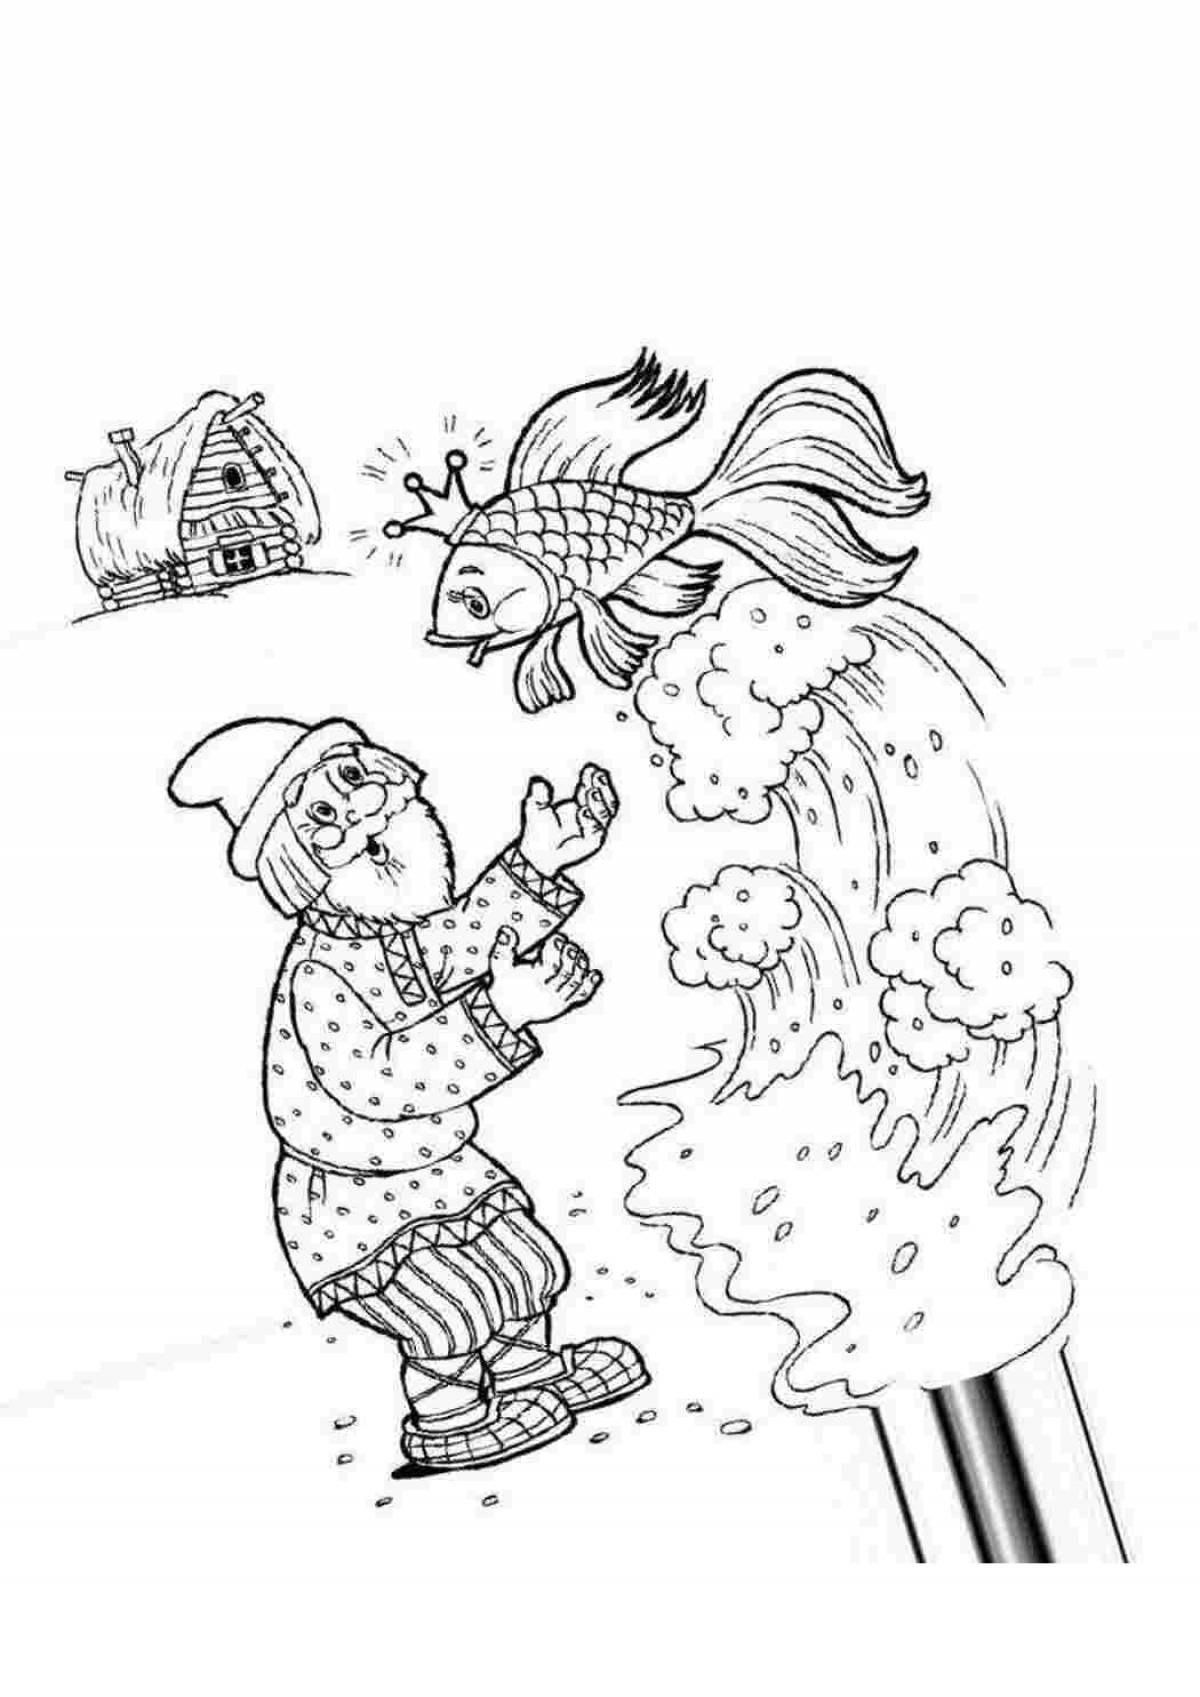 Animated coloring book based on the tale of the fisherman and the fish drawing